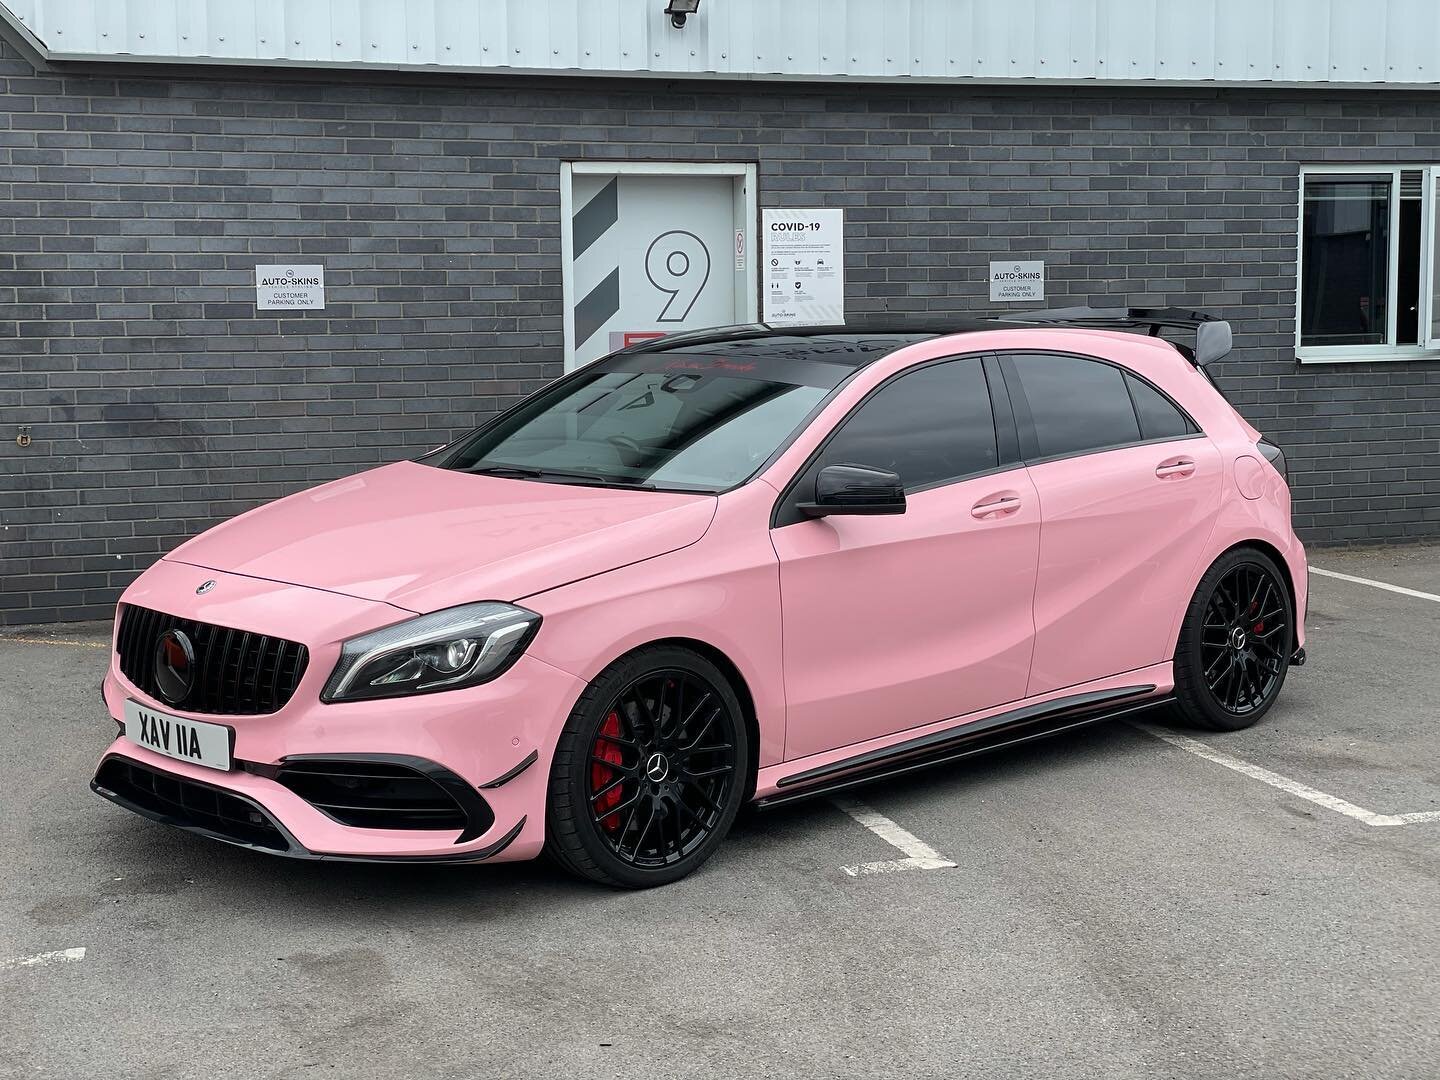 Full wrap complete for @xaviabrooke on her Mercedes-Benz A45 😍 - How amazing does this look 👀, @teckwrap Have absolutely nailed the paint like finish with this material. What do we all think? Drop your comments below 👇🏼 &mdash;&mdash;&mdash;&mdas